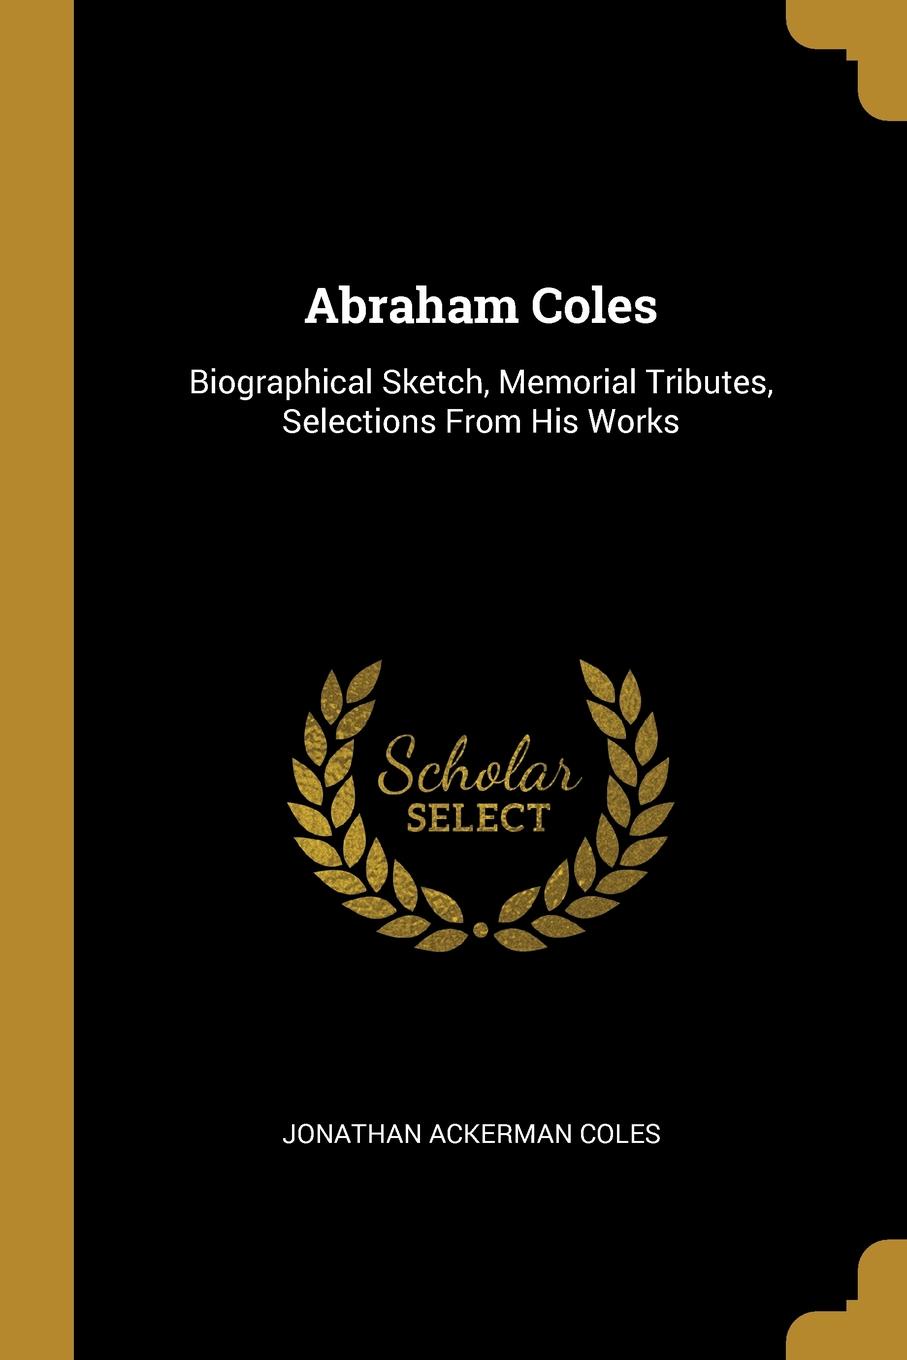 Abraham Coles. Biographical Sketch, Memorial Tributes, Selections From His Works